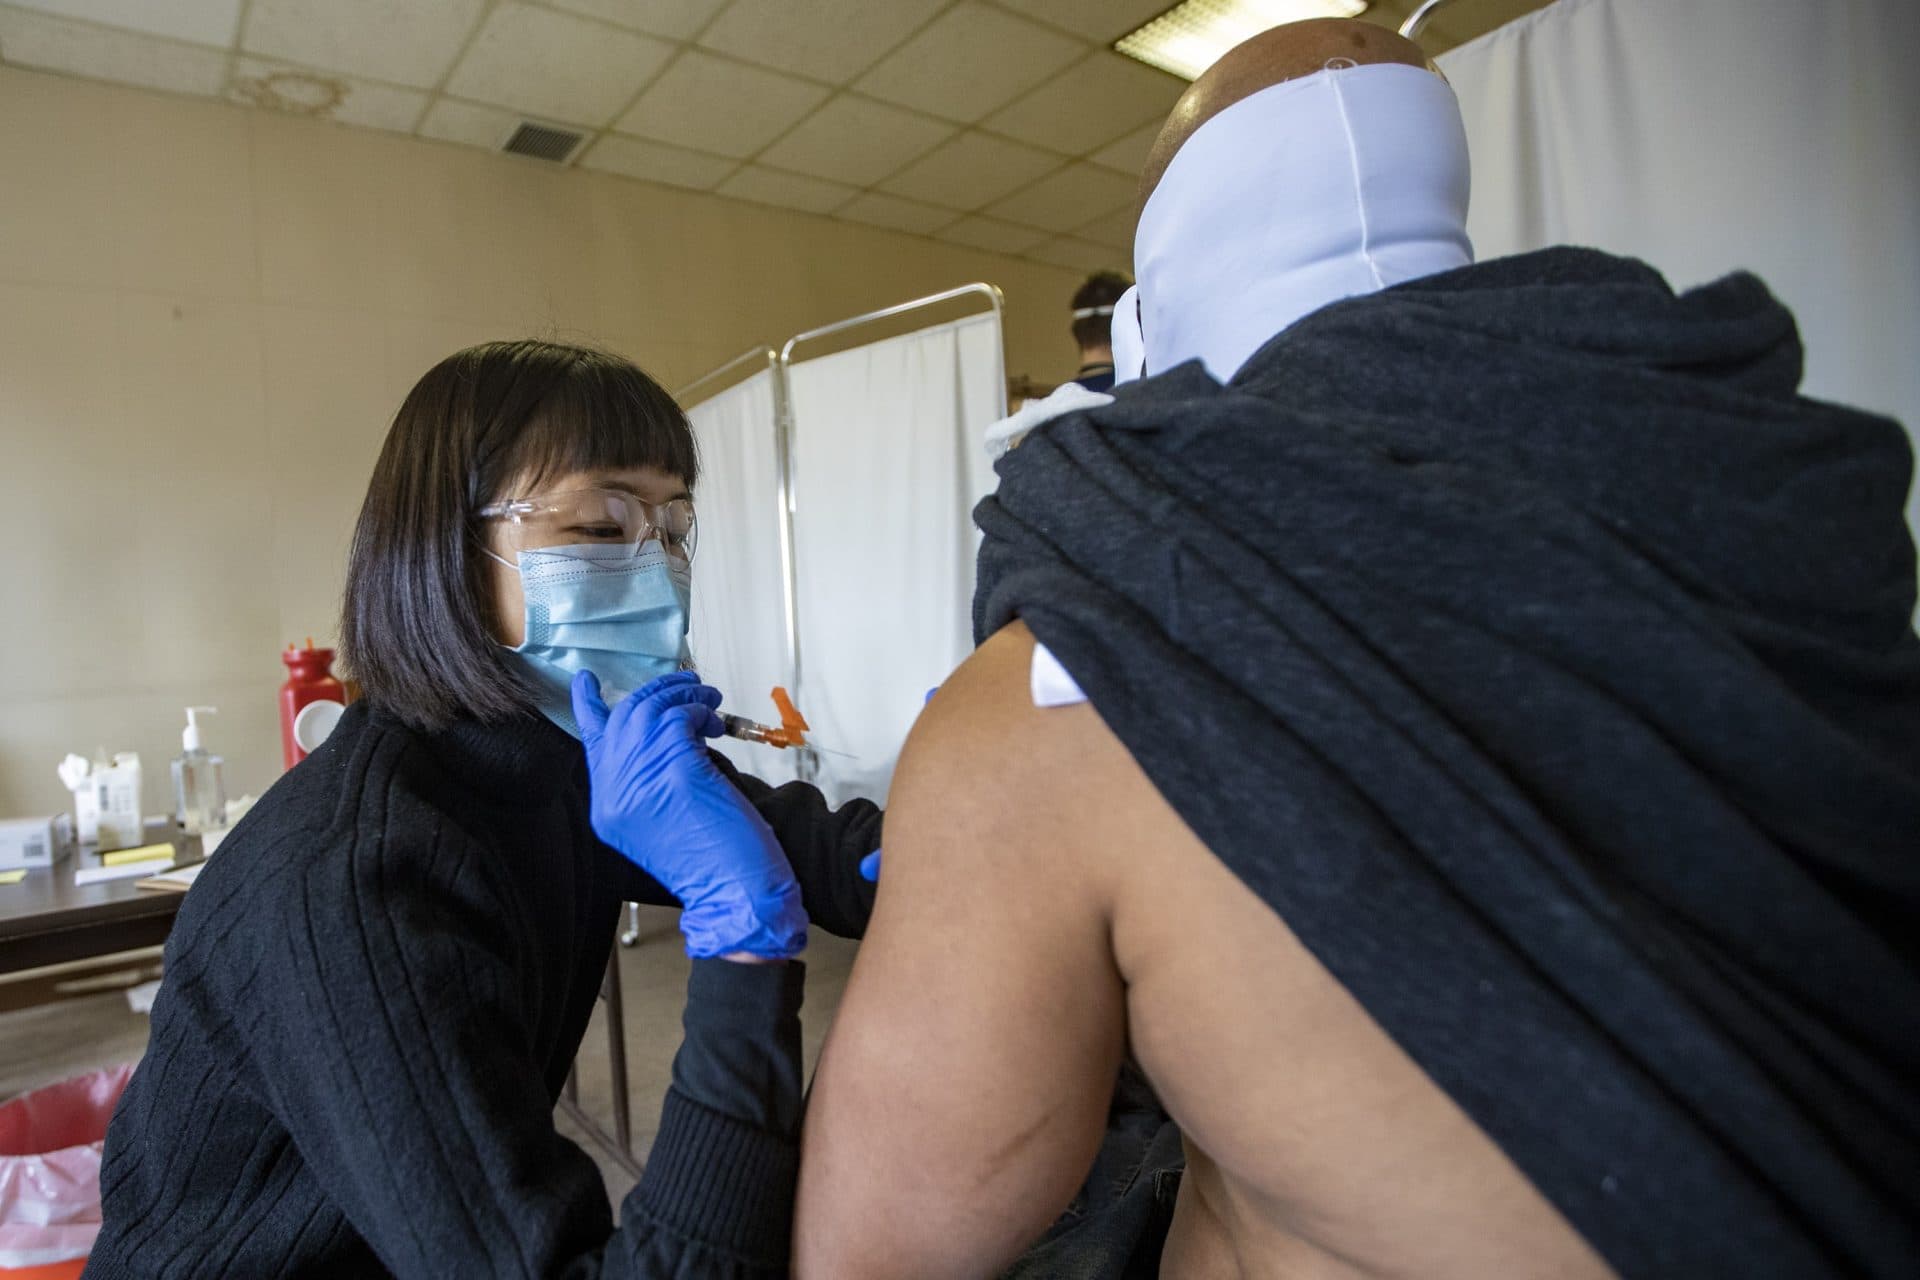 UMASS Medical School student Valerie Zhu administers the Moderna COVID-19 vaccine to Bobby Hammond, a client at Dismas House, at the Hotel Grace homeless shelter in Worcester. (Jesse Costa/WBUR)